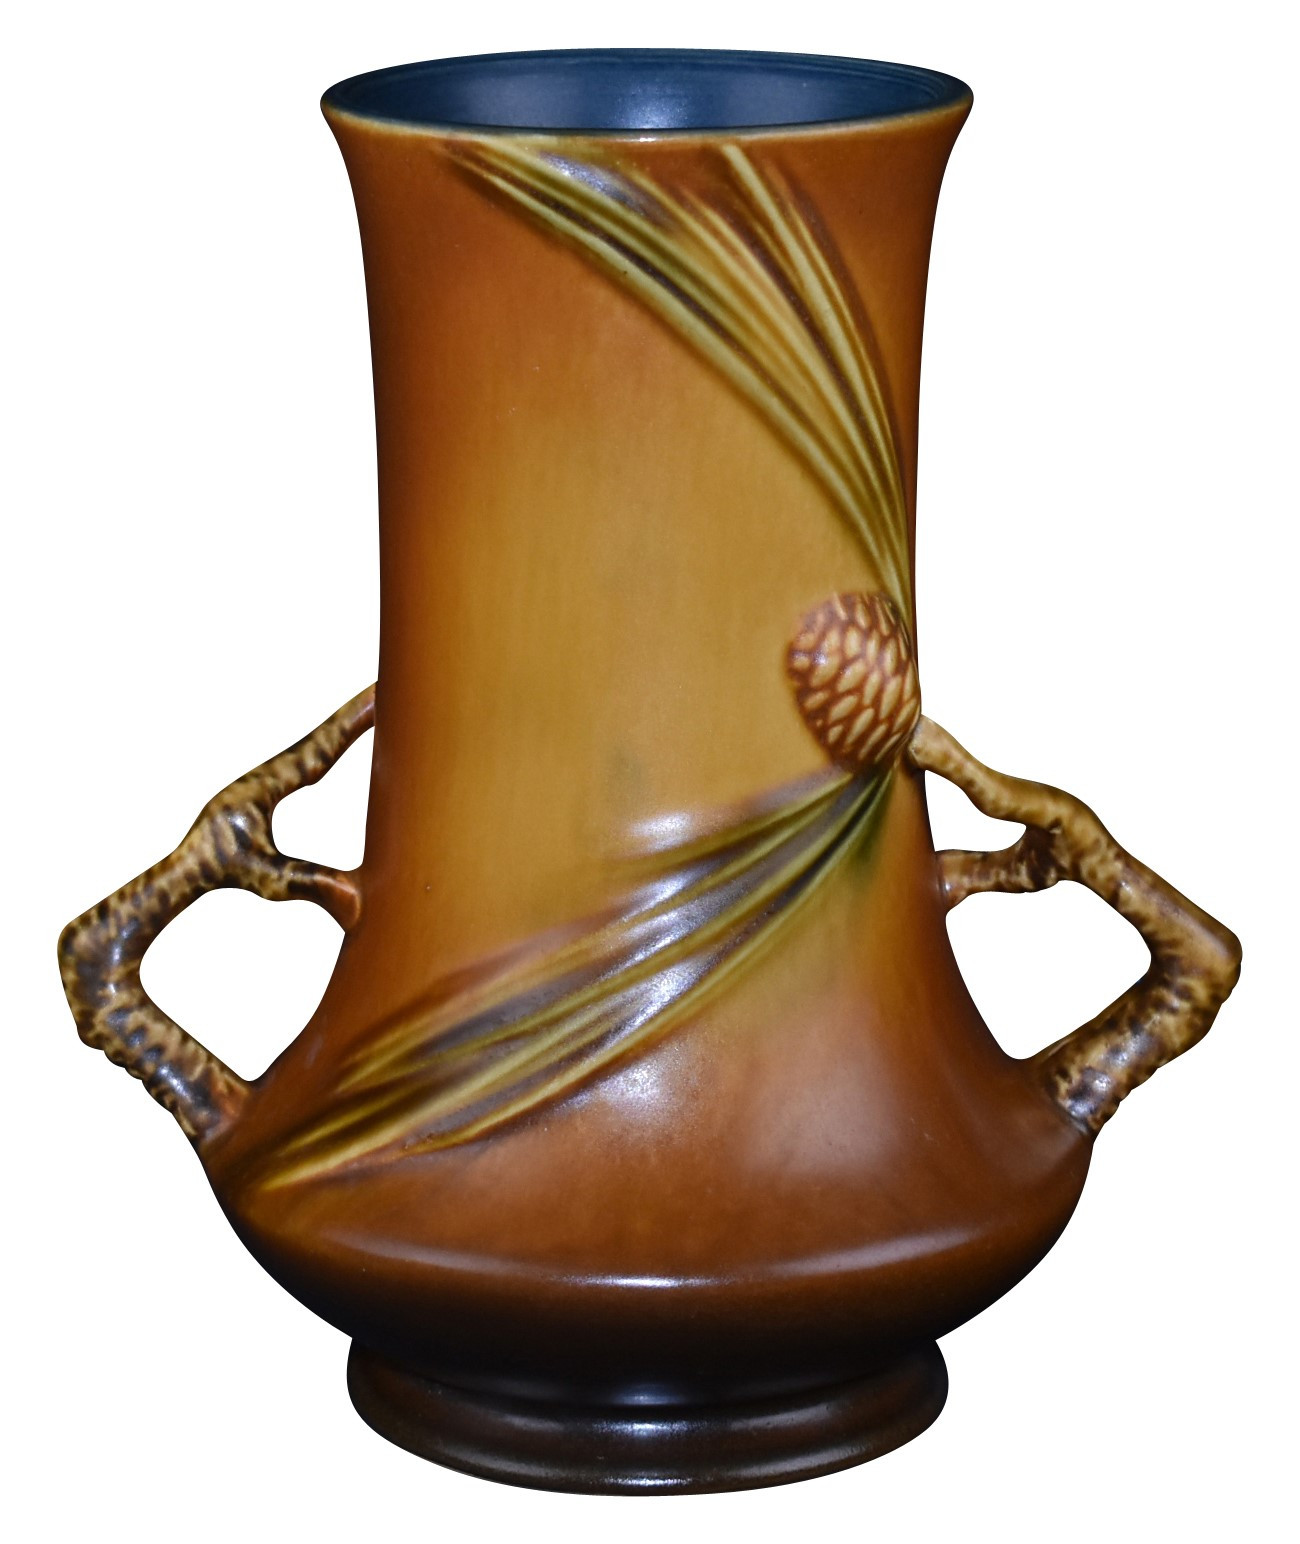 stangl pottery vase of just art pottery from just art pottery regarding roseville pottery pine cone brown vase 842 8